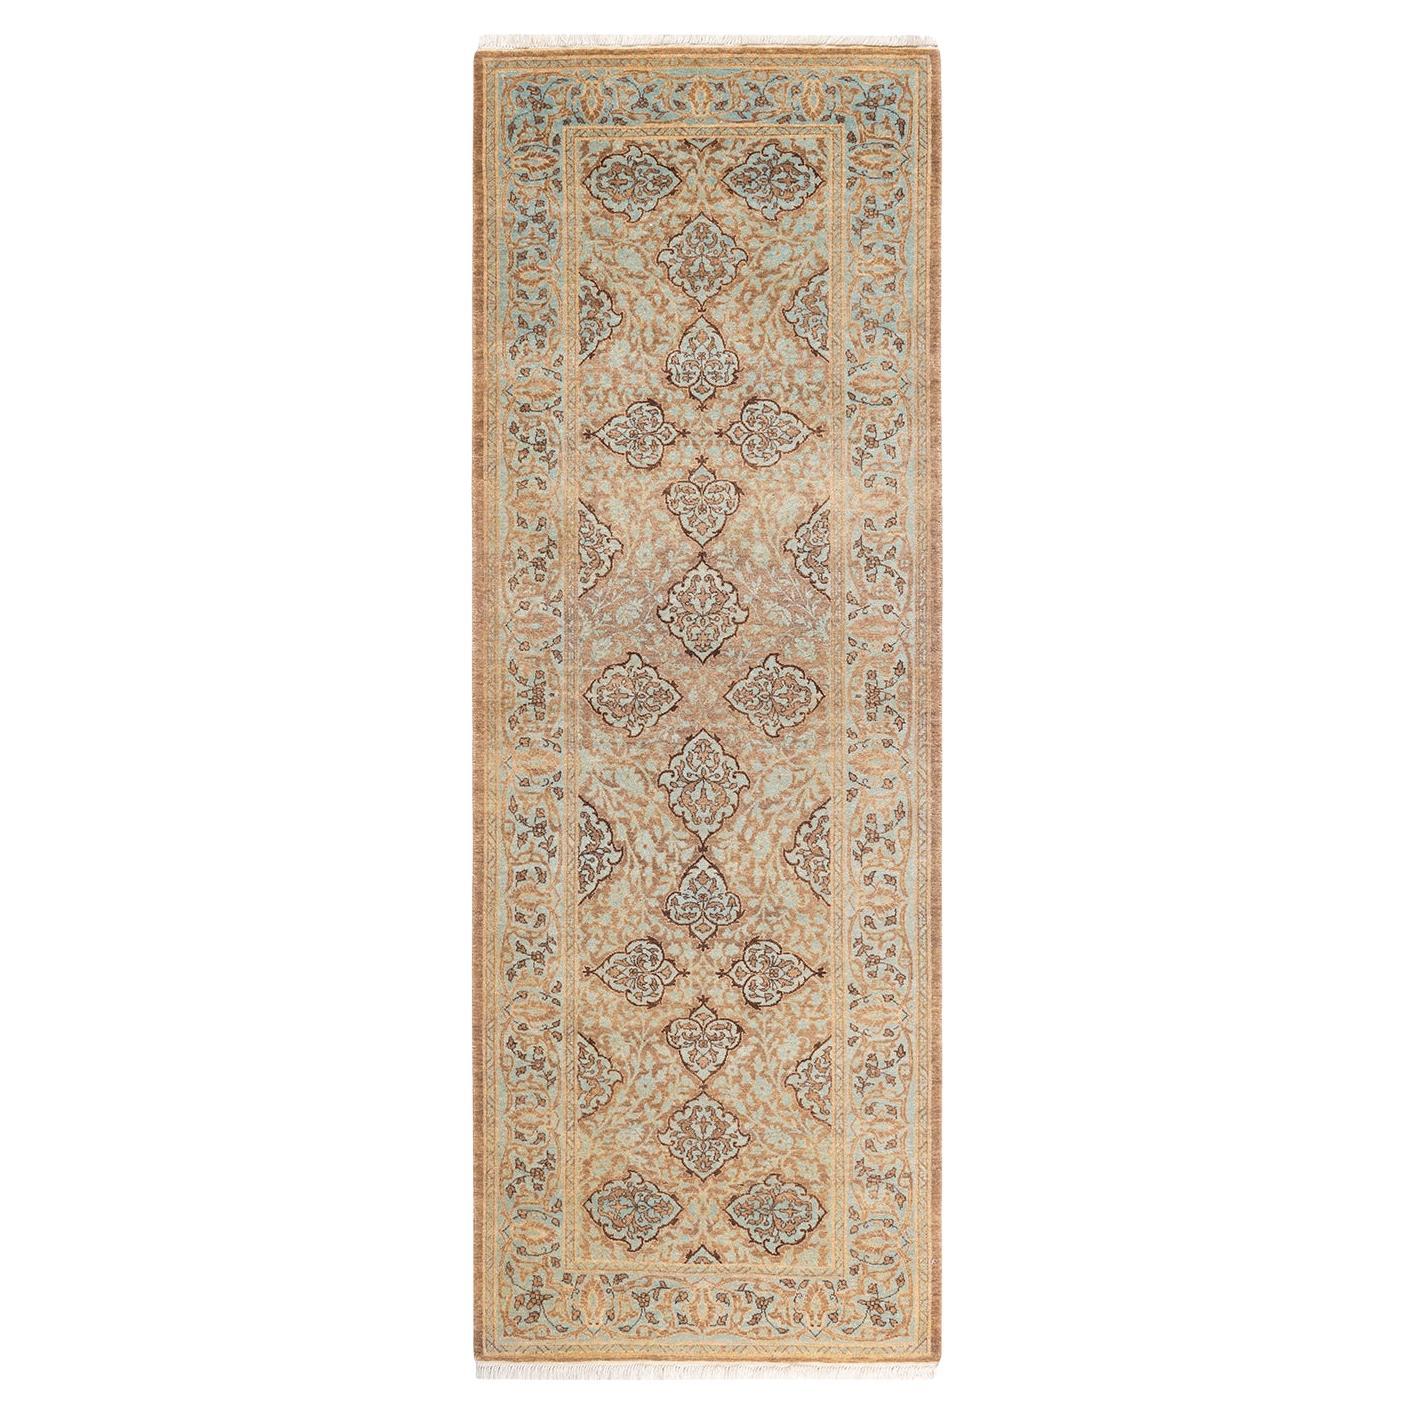 One-of-a-kind Hand Knotted Wool Mogul Brown Area Rug